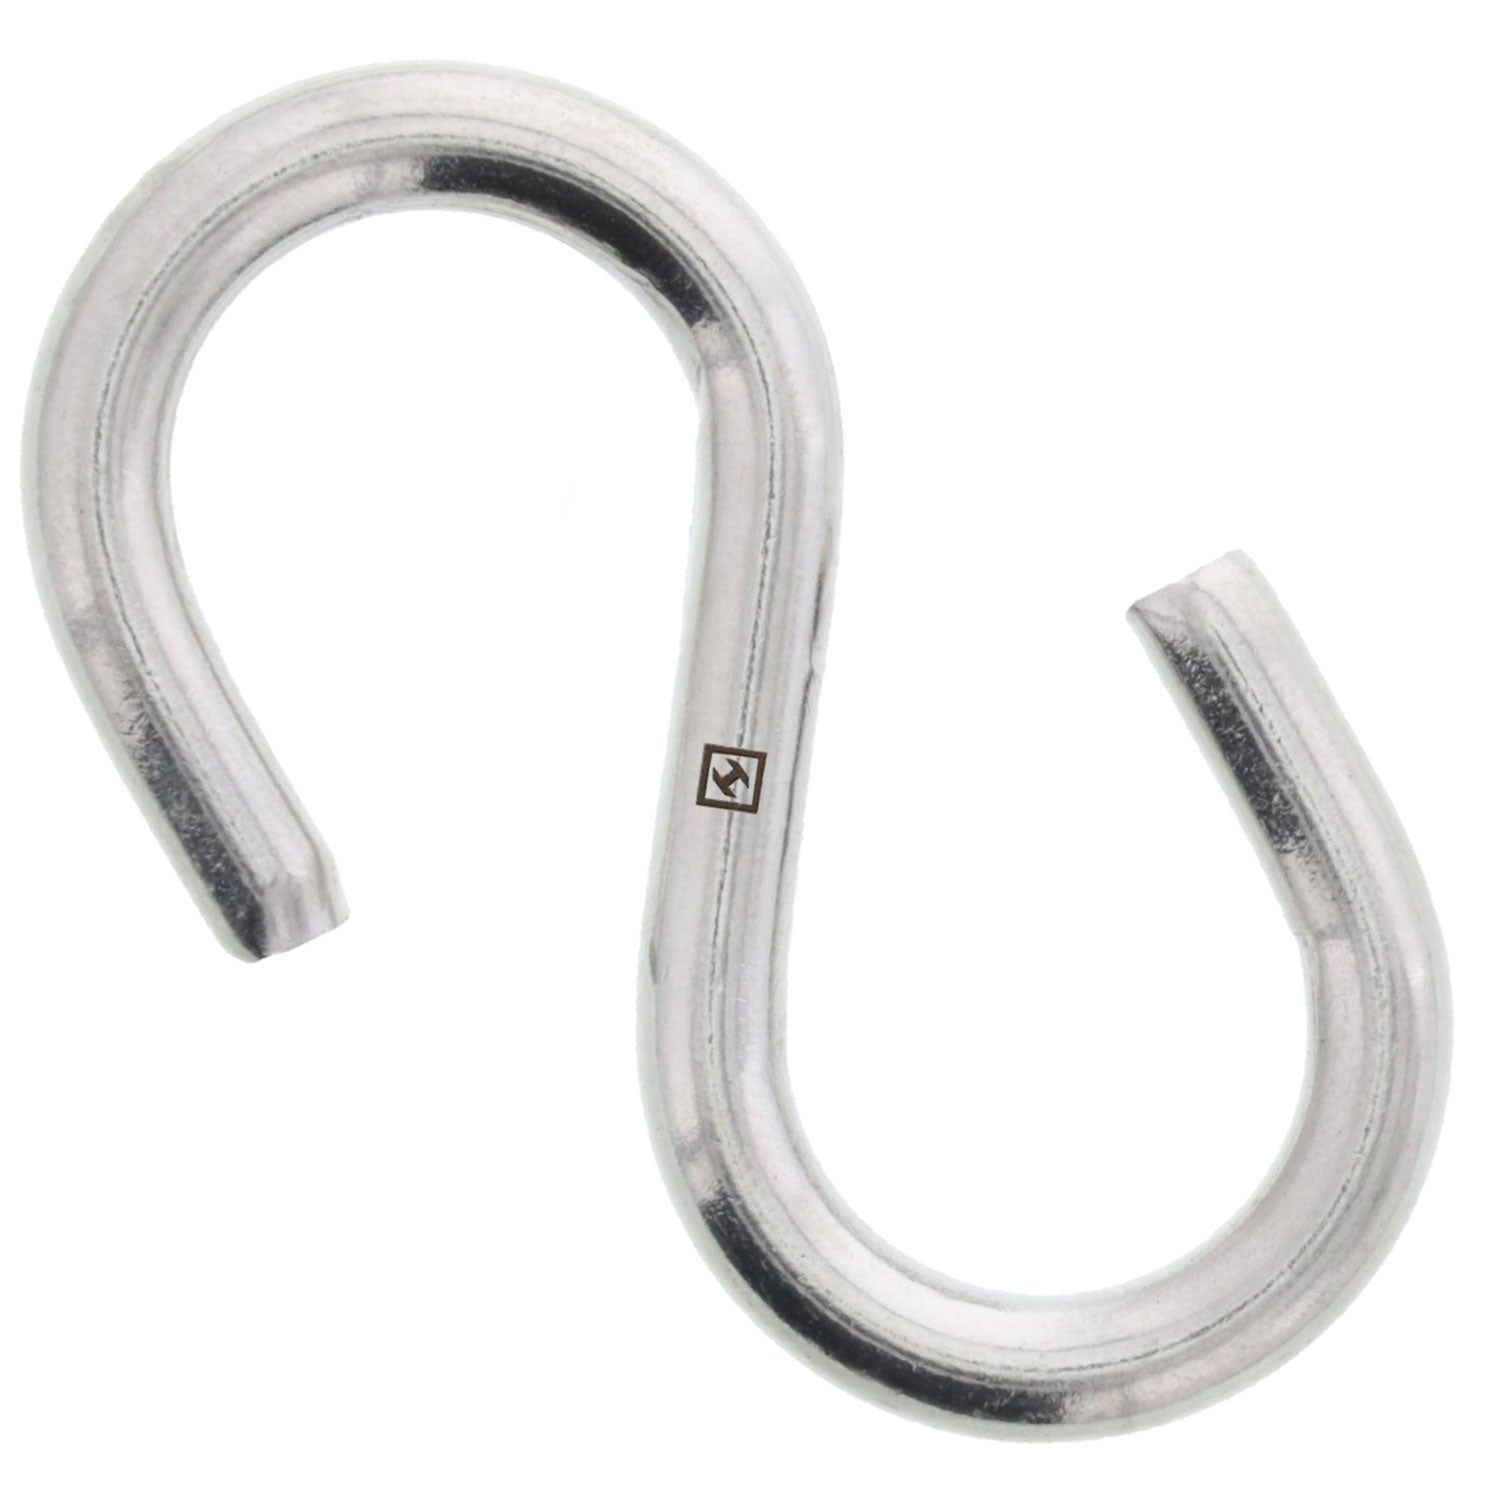 Wholesale Double S Hook 304 Stainless Steel Wall Hooks 